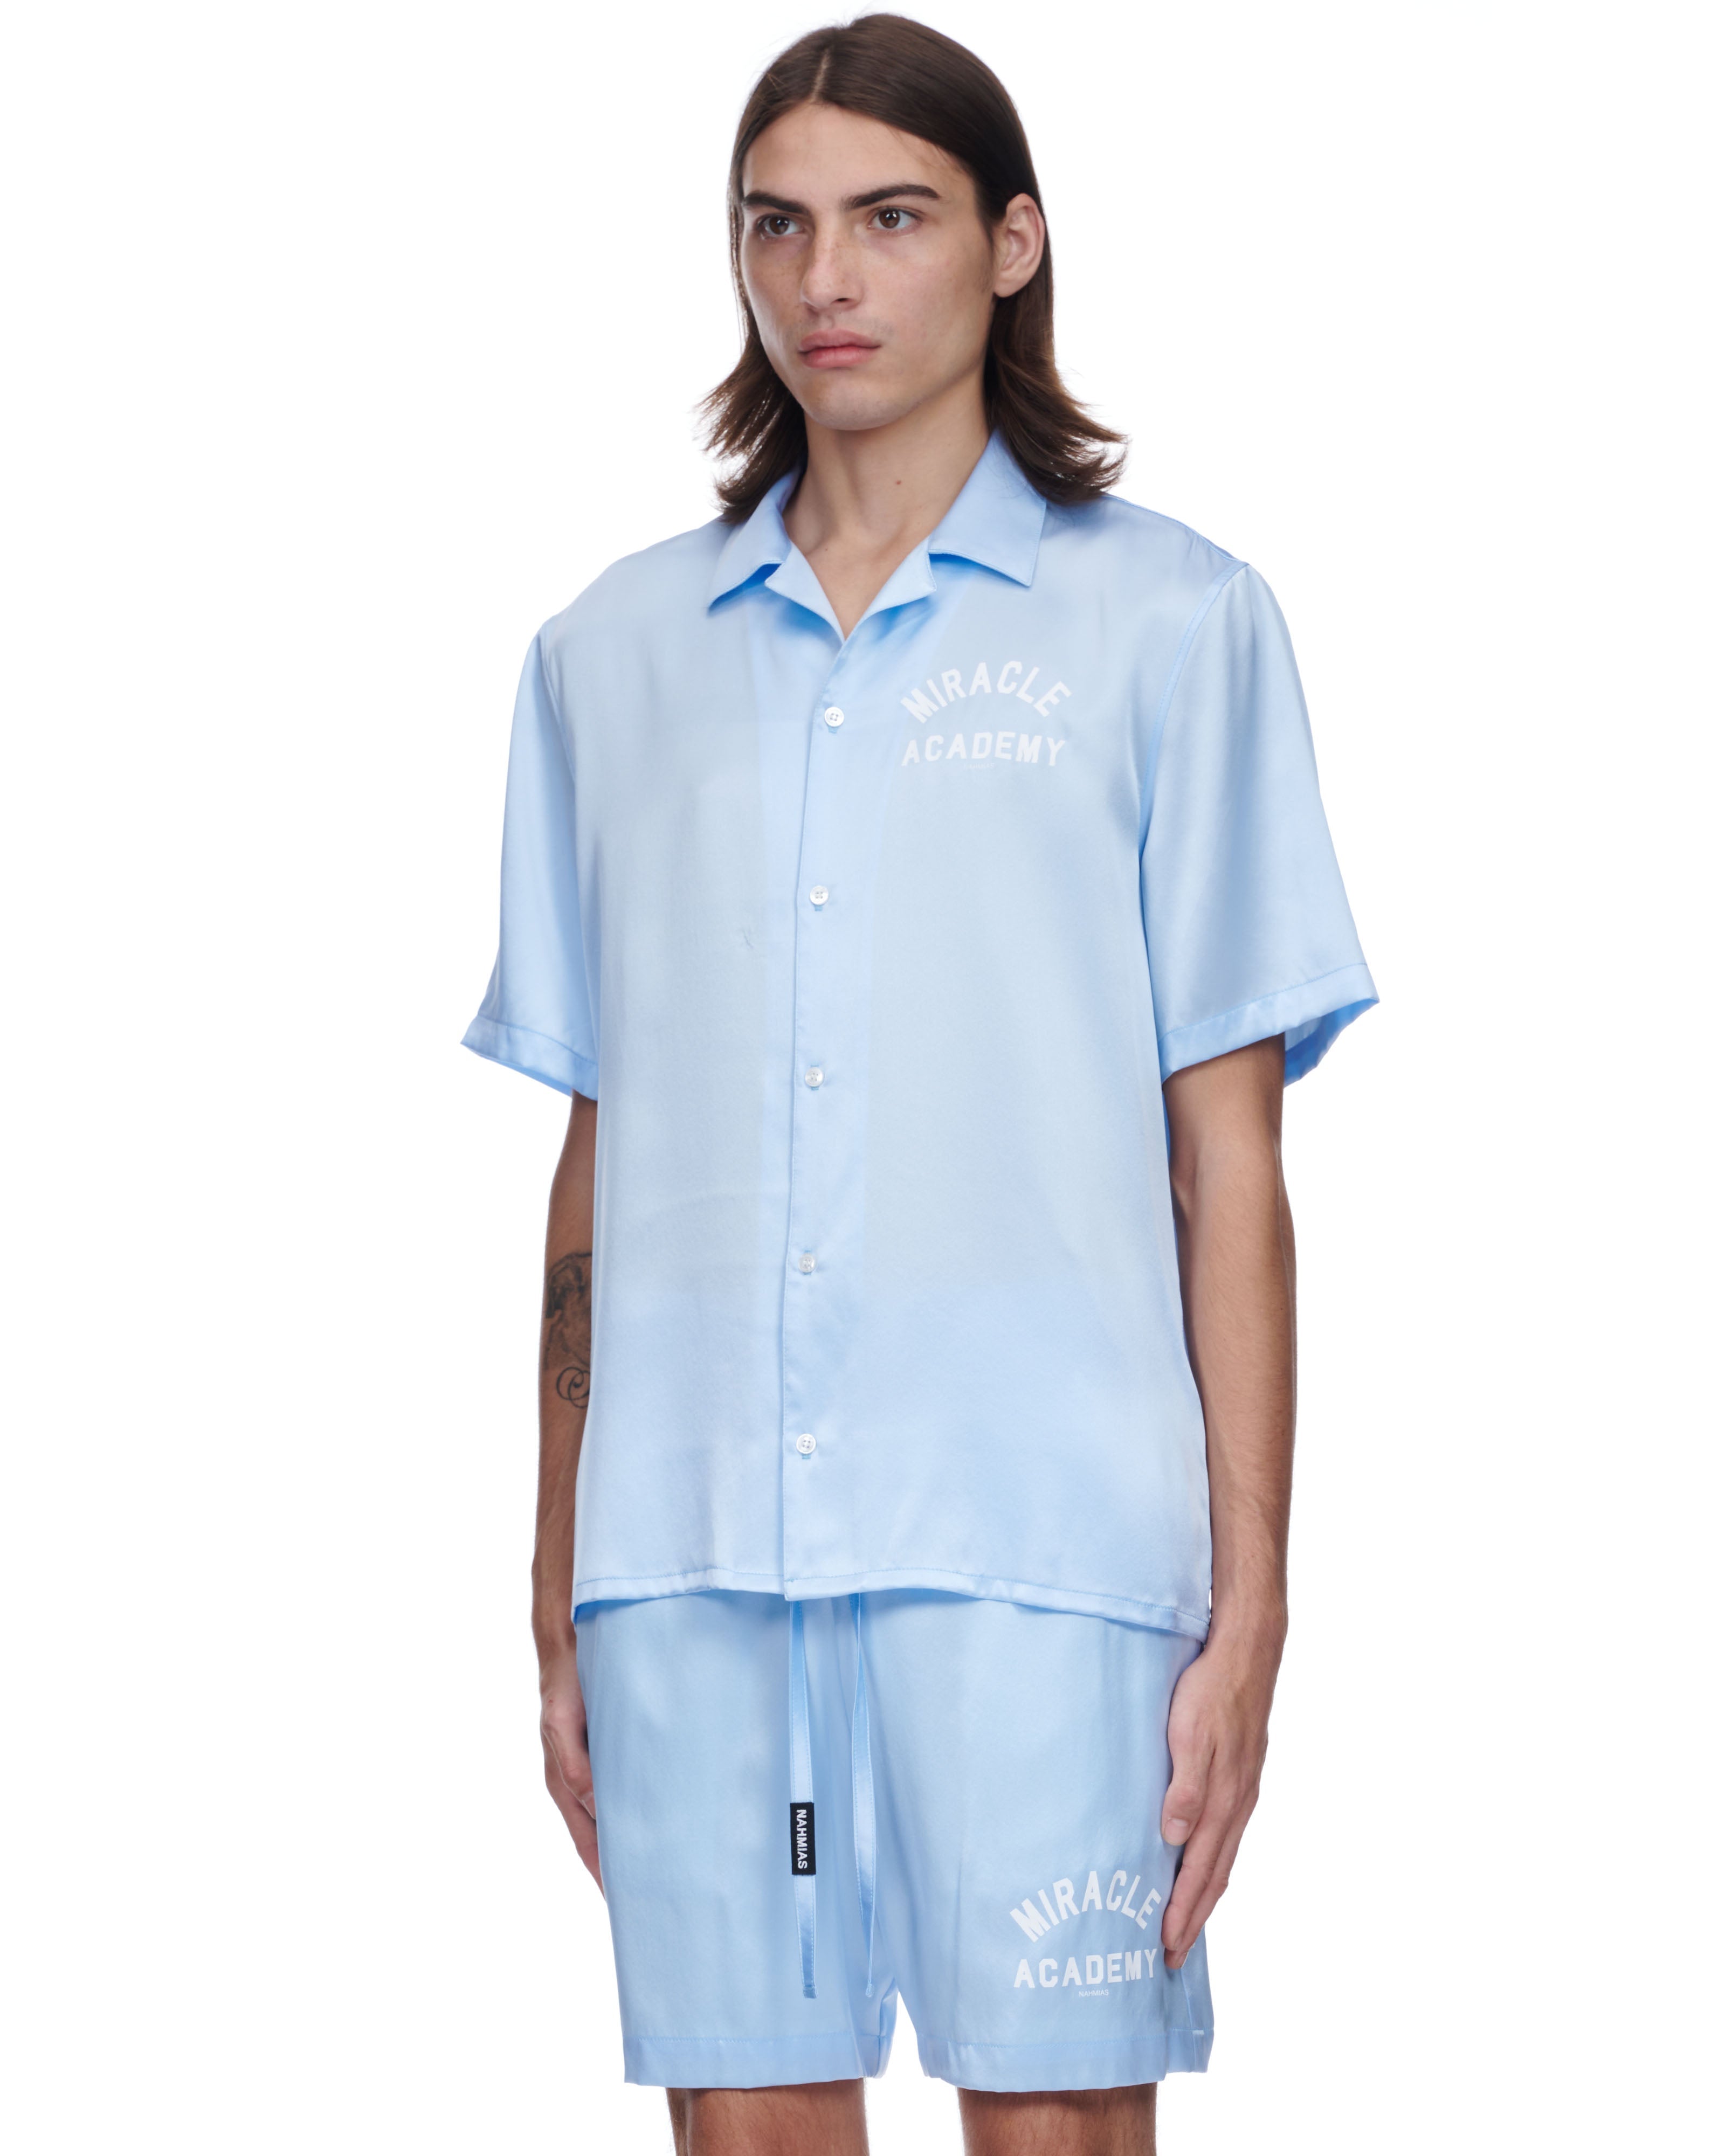 Miracle Academy Silk S/S Button Down